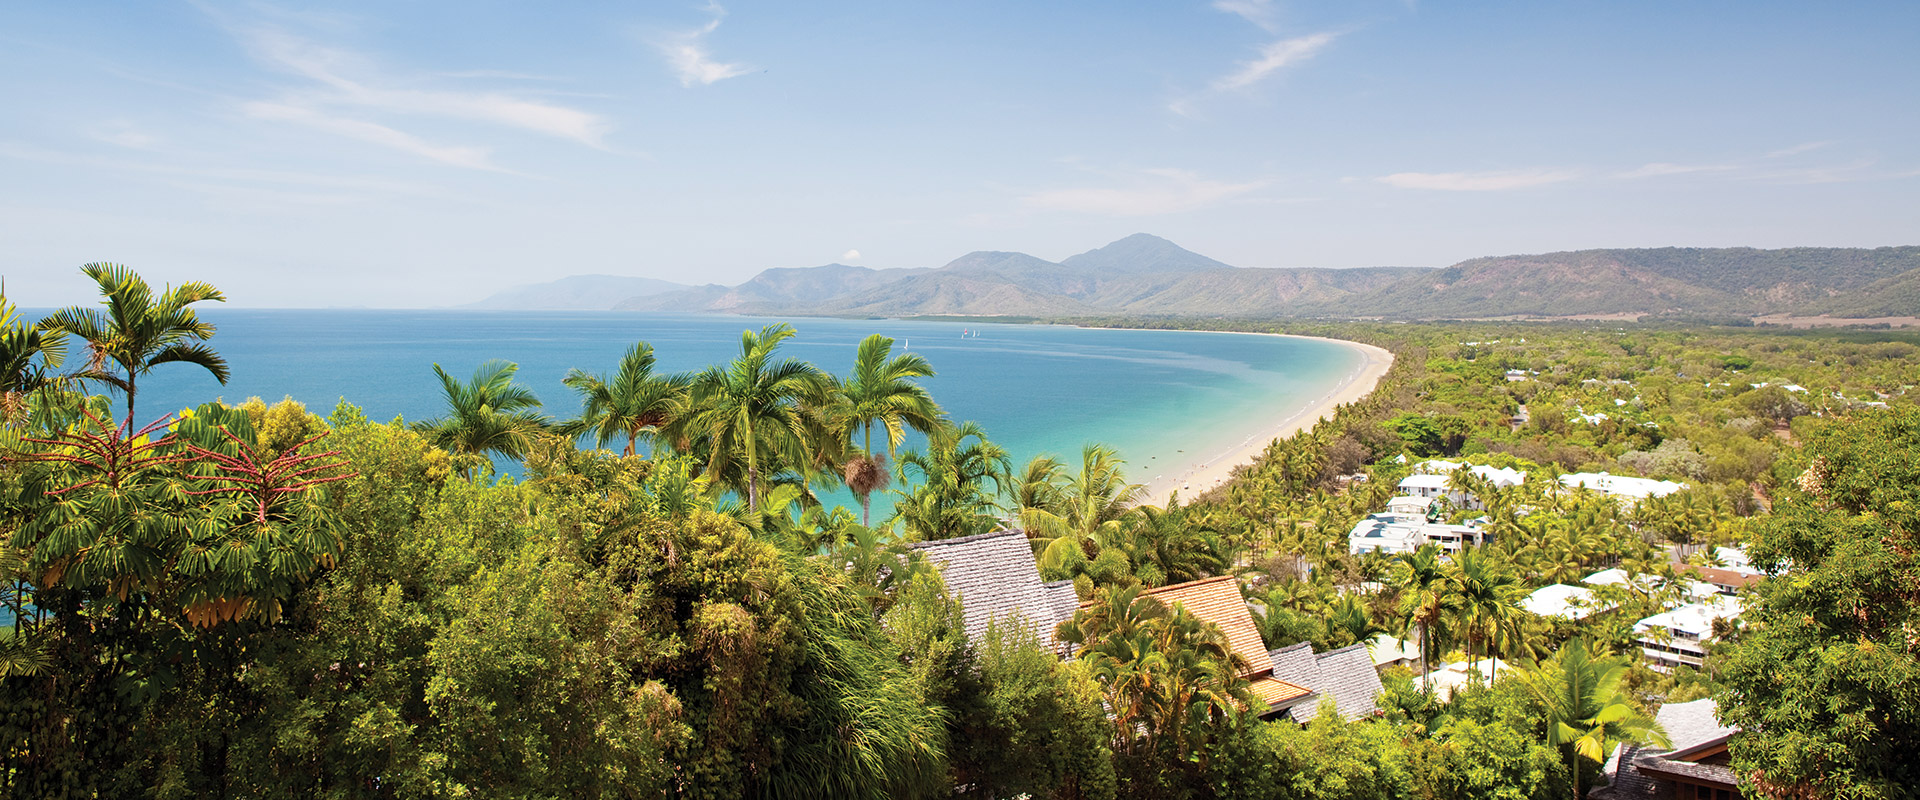 Aerial view over the coastal town of Port Douglas set amongst the palm trees and turquoise waters